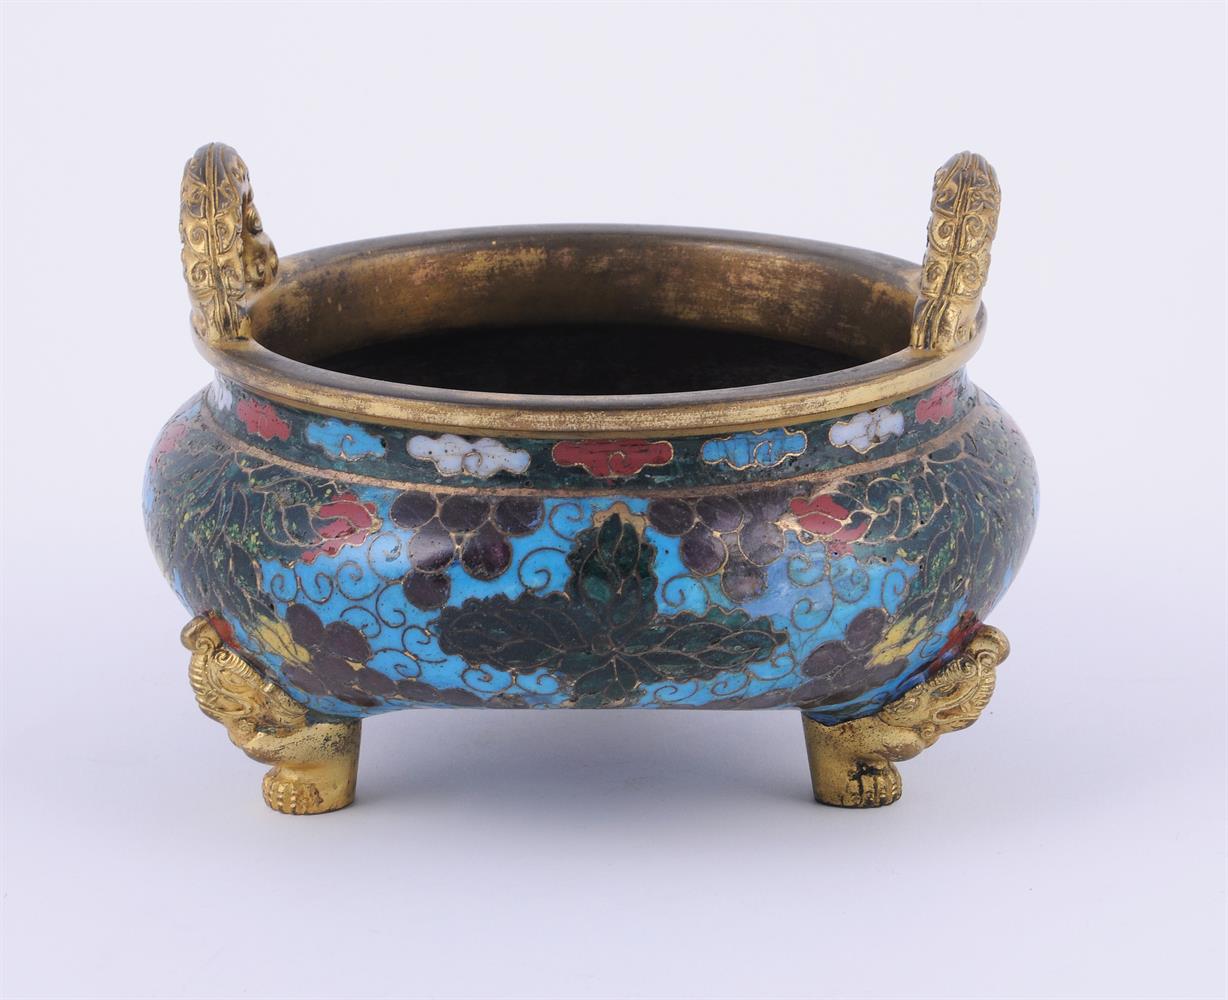 A rare Chinese Cloisonné enamel censer Ming Dynasty 16-17th century - Image 3 of 7